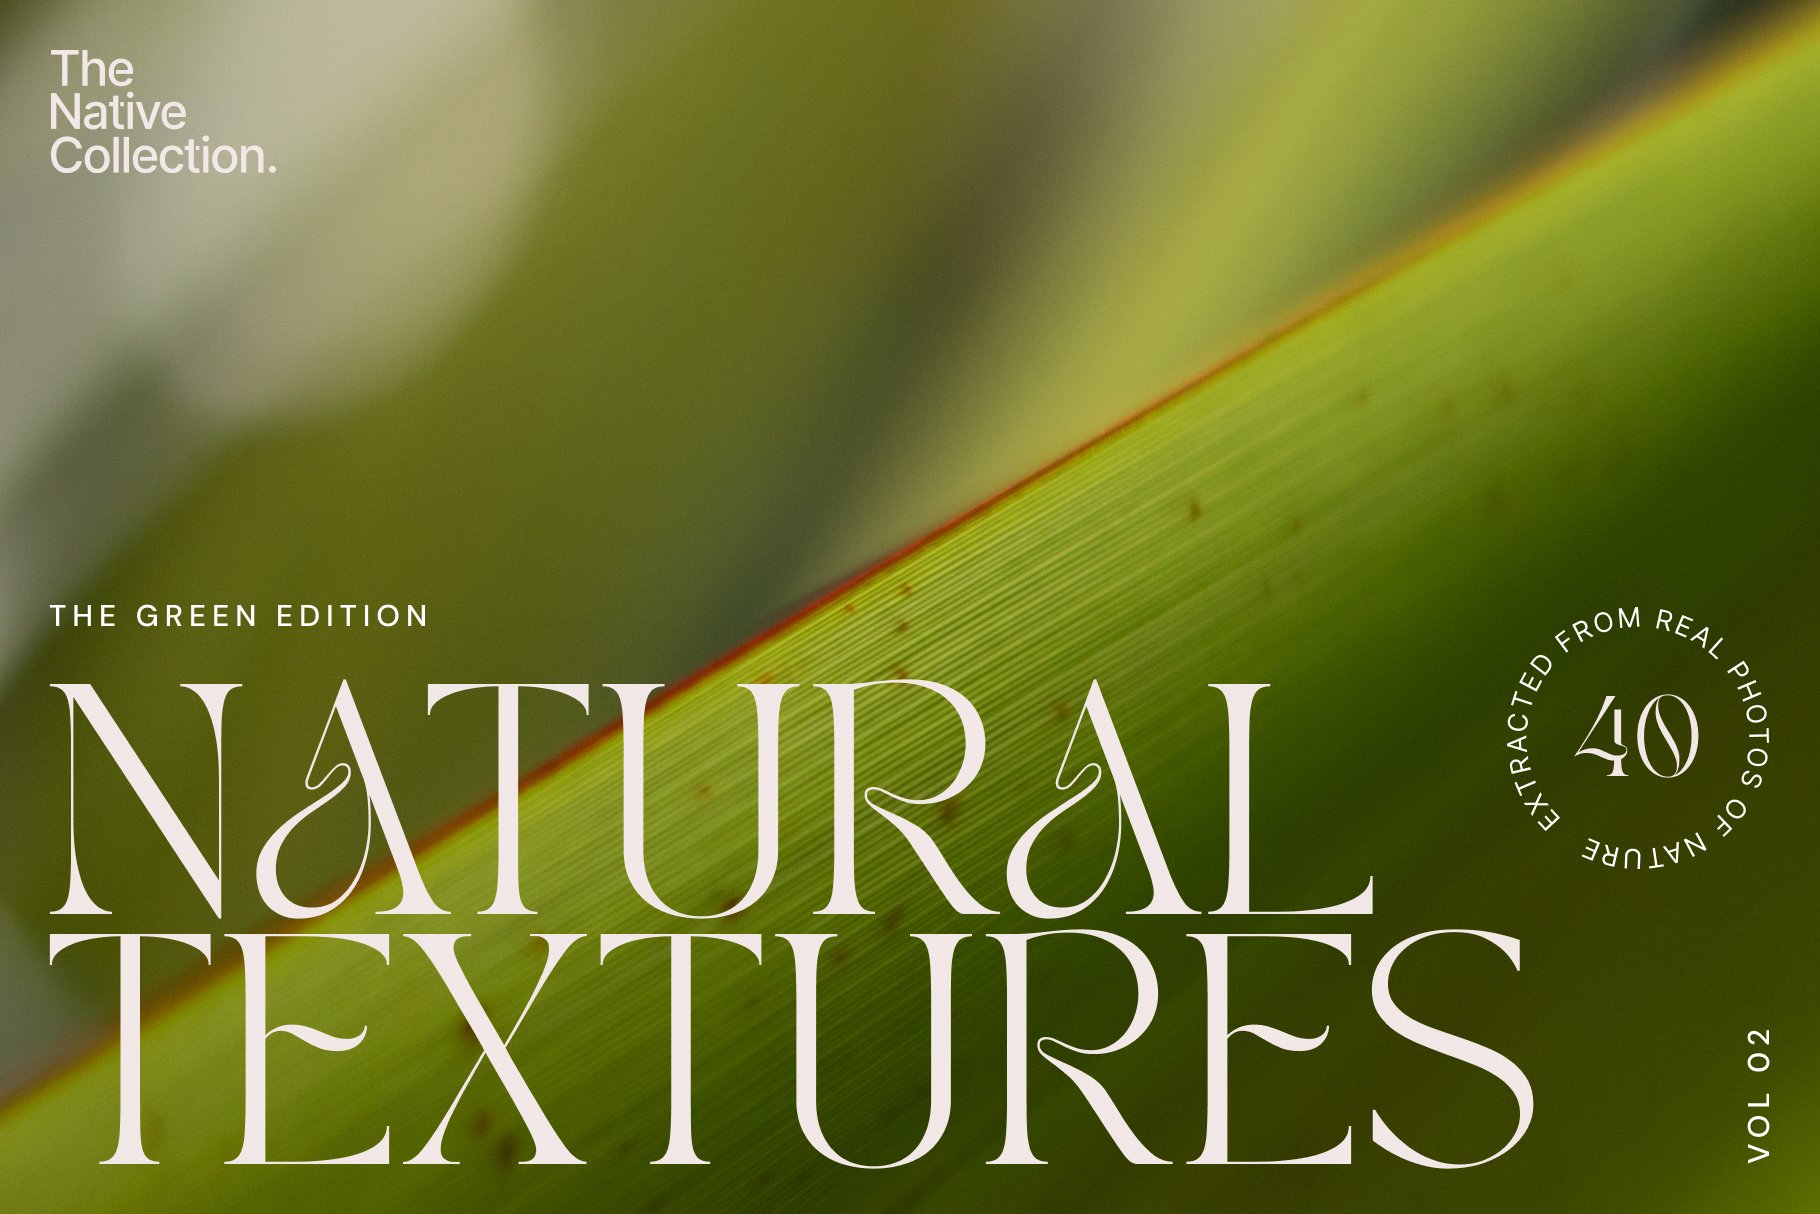 Natural textures - Green edition v02 cover image.